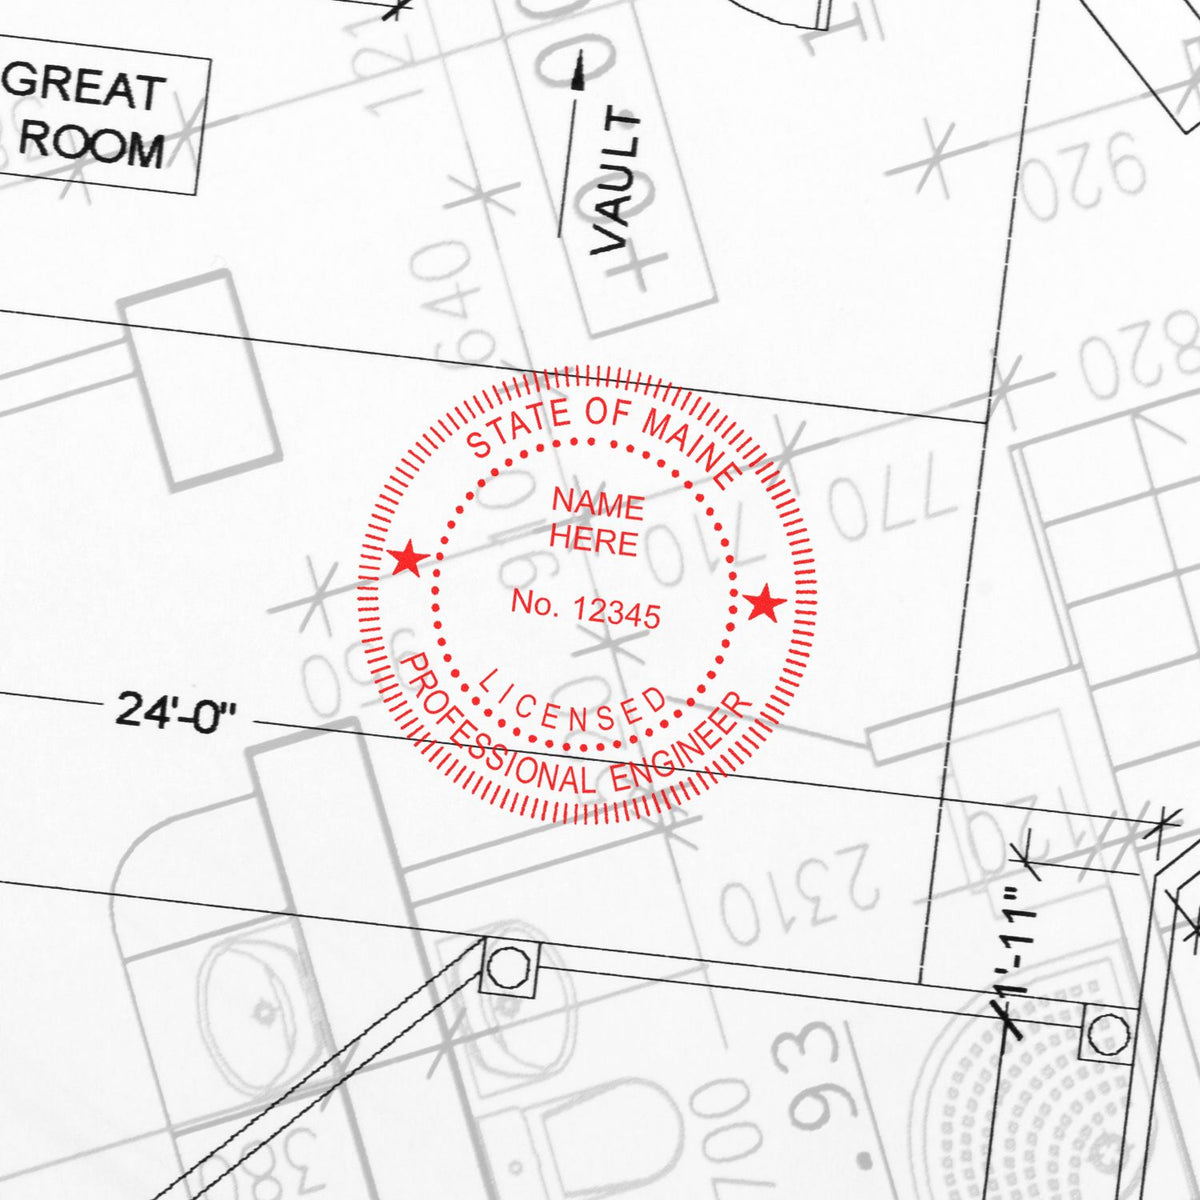 The Premium MaxLight Pre-Inked Maine Engineering Stamp stamp impression comes to life with a crisp, detailed photo on paper - showcasing true professional quality.